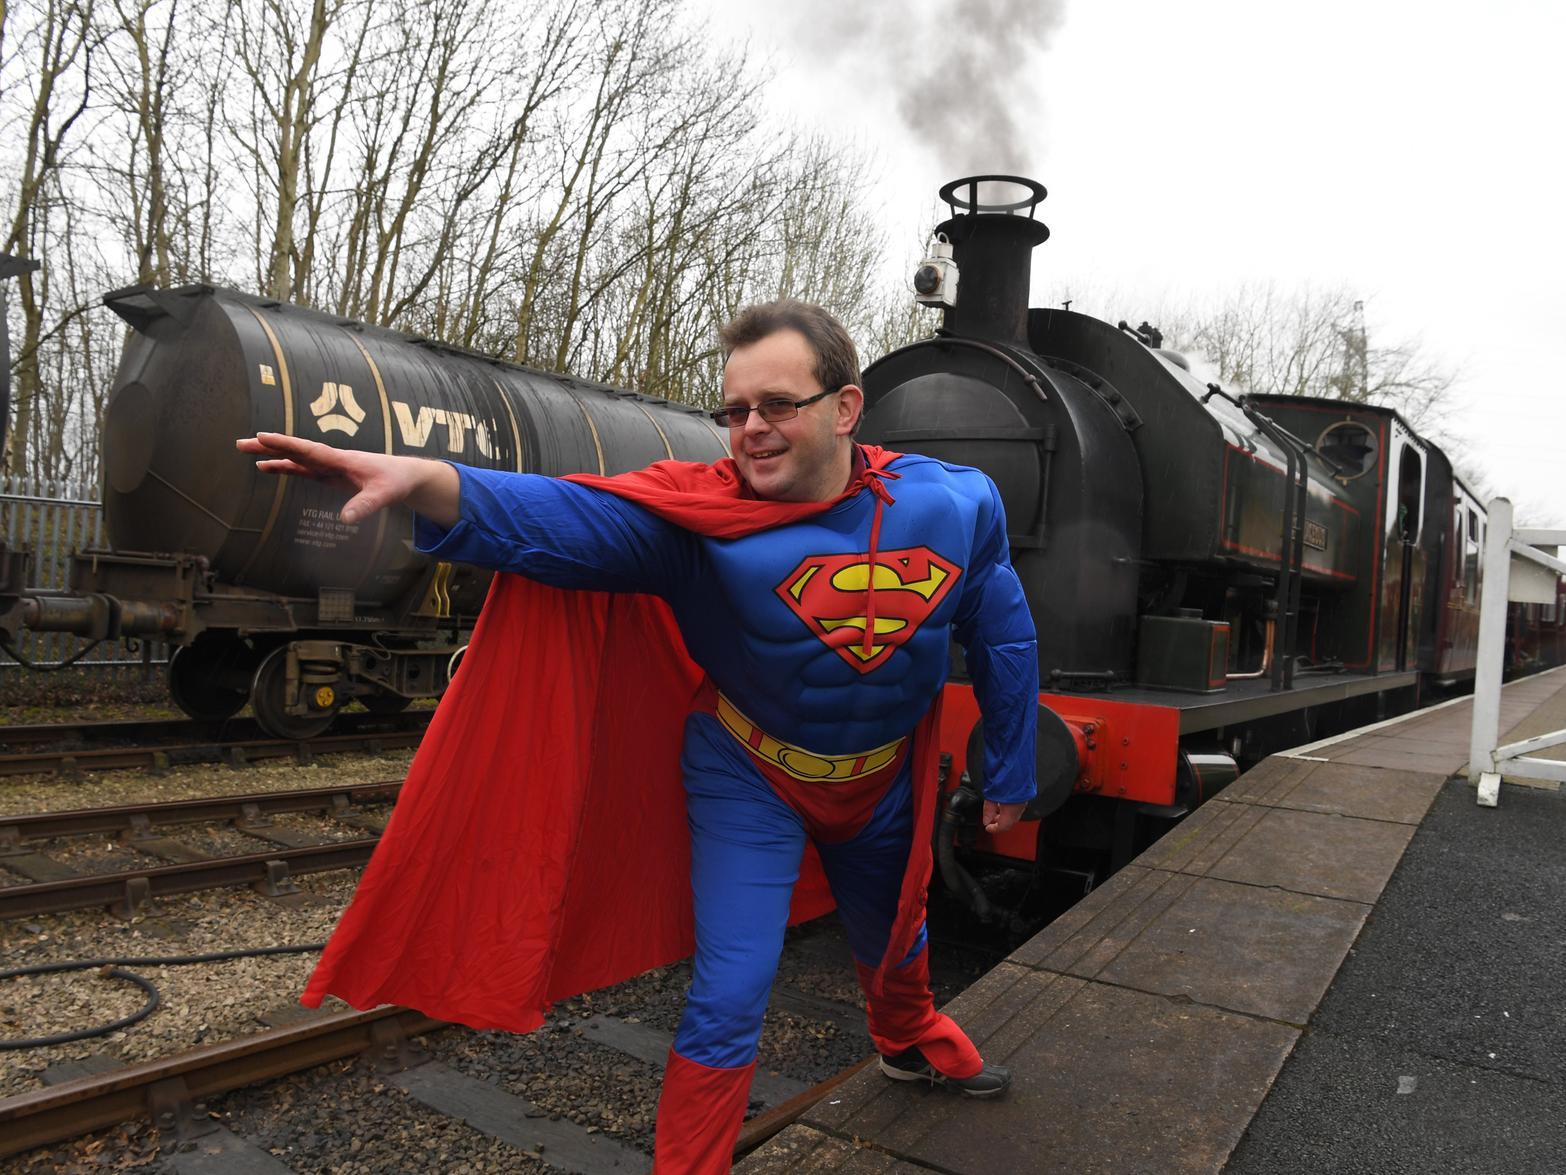 Superhero day at Ribble Steam Railway and Museum
Faster than a speeding train ... Martin Clarke as Superman.